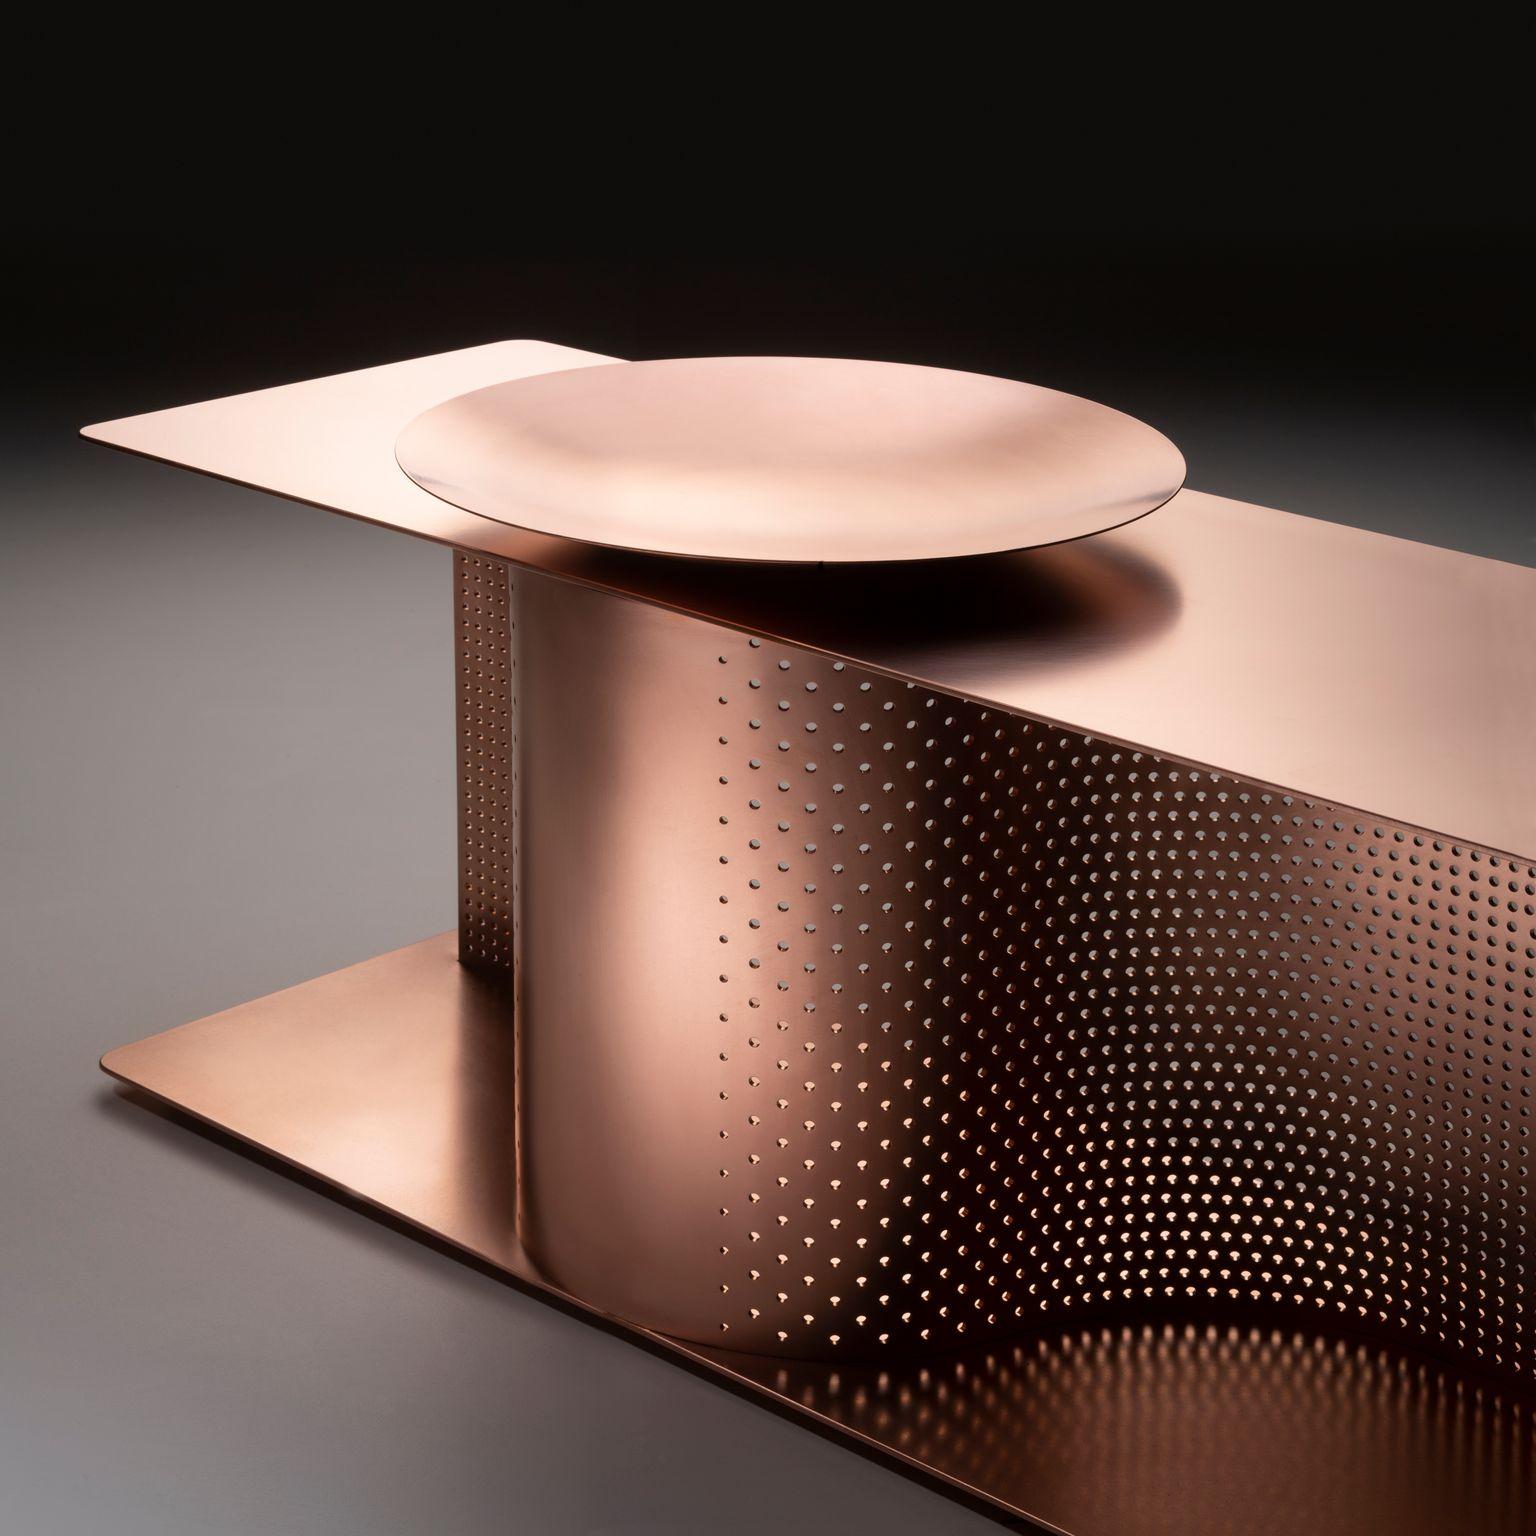 DeCastelli Wave Bench in Copper by Lanzavecchia+Wai In New Condition For Sale In Brooklyn, NY